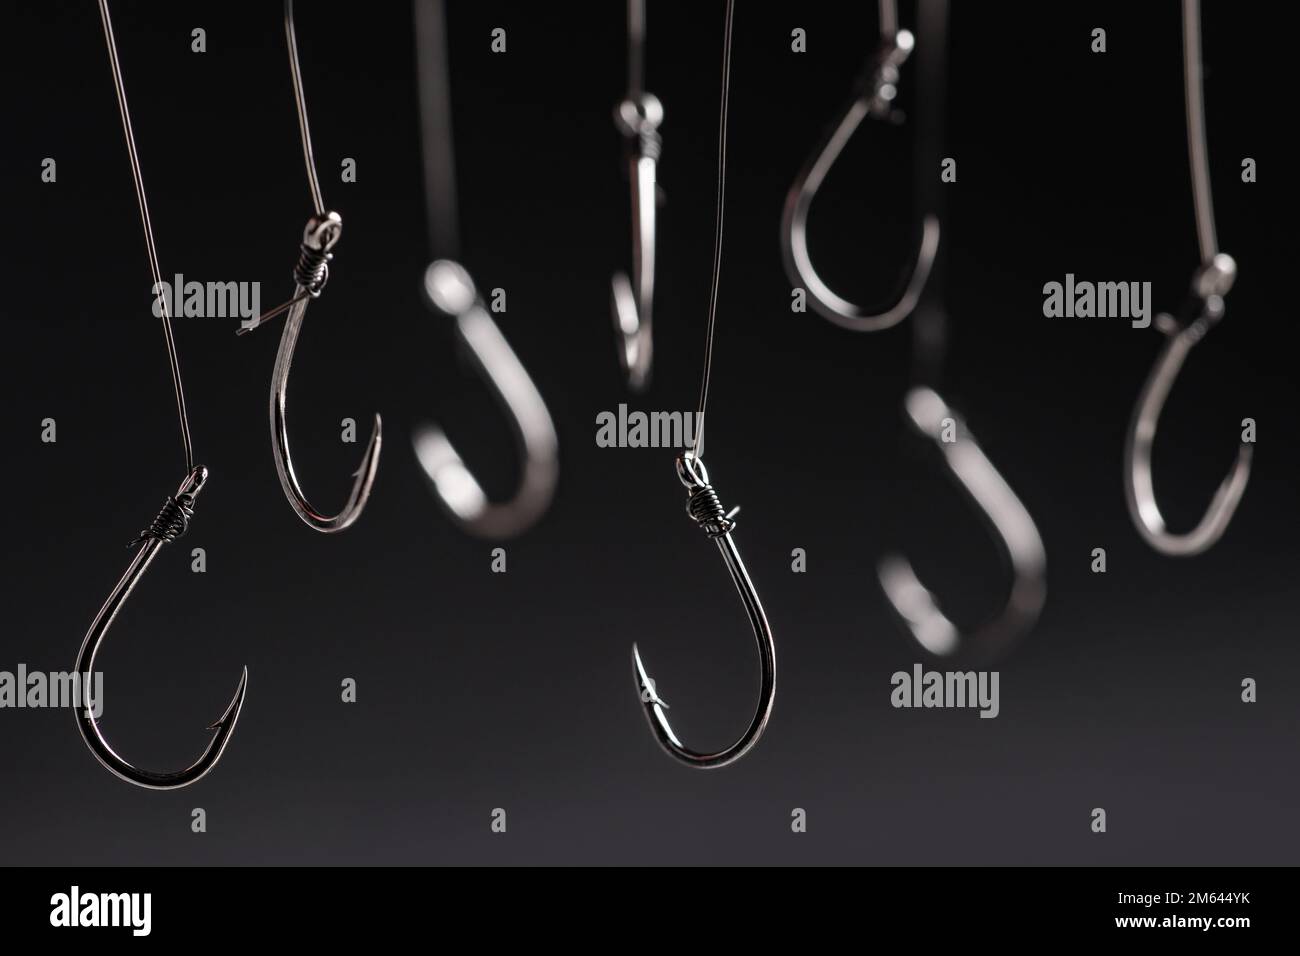 A fishing hooks hanging on a fishing line on a black background. Concept Stock Photo